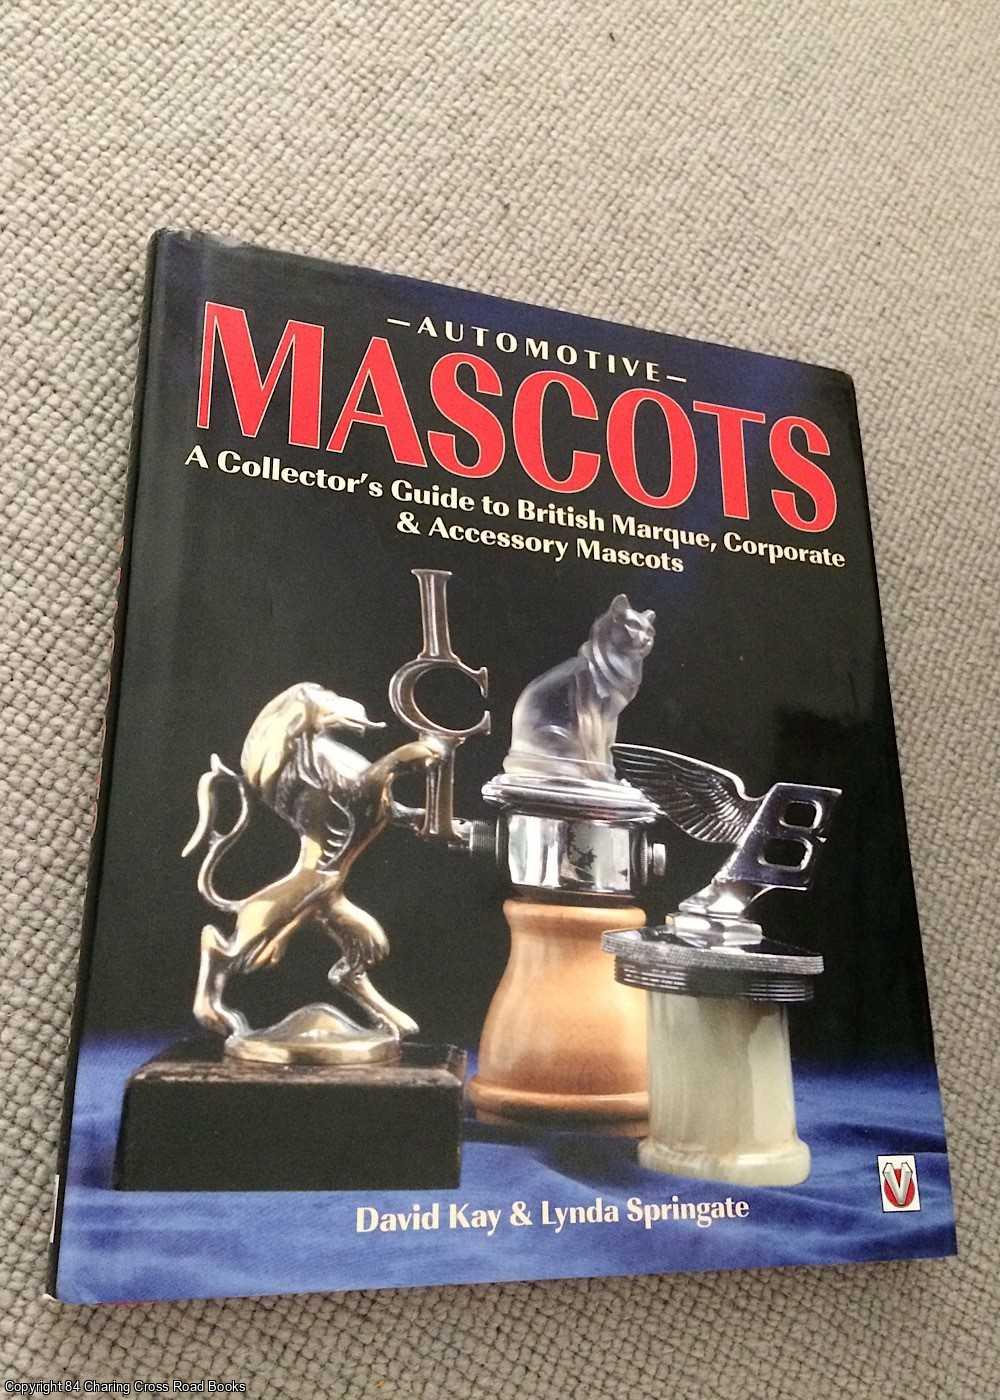 Springate, Lynda, Kay, David - Automotive Mascots: A Collector's Guide to British Marque, Corporate and Accessory Mascots